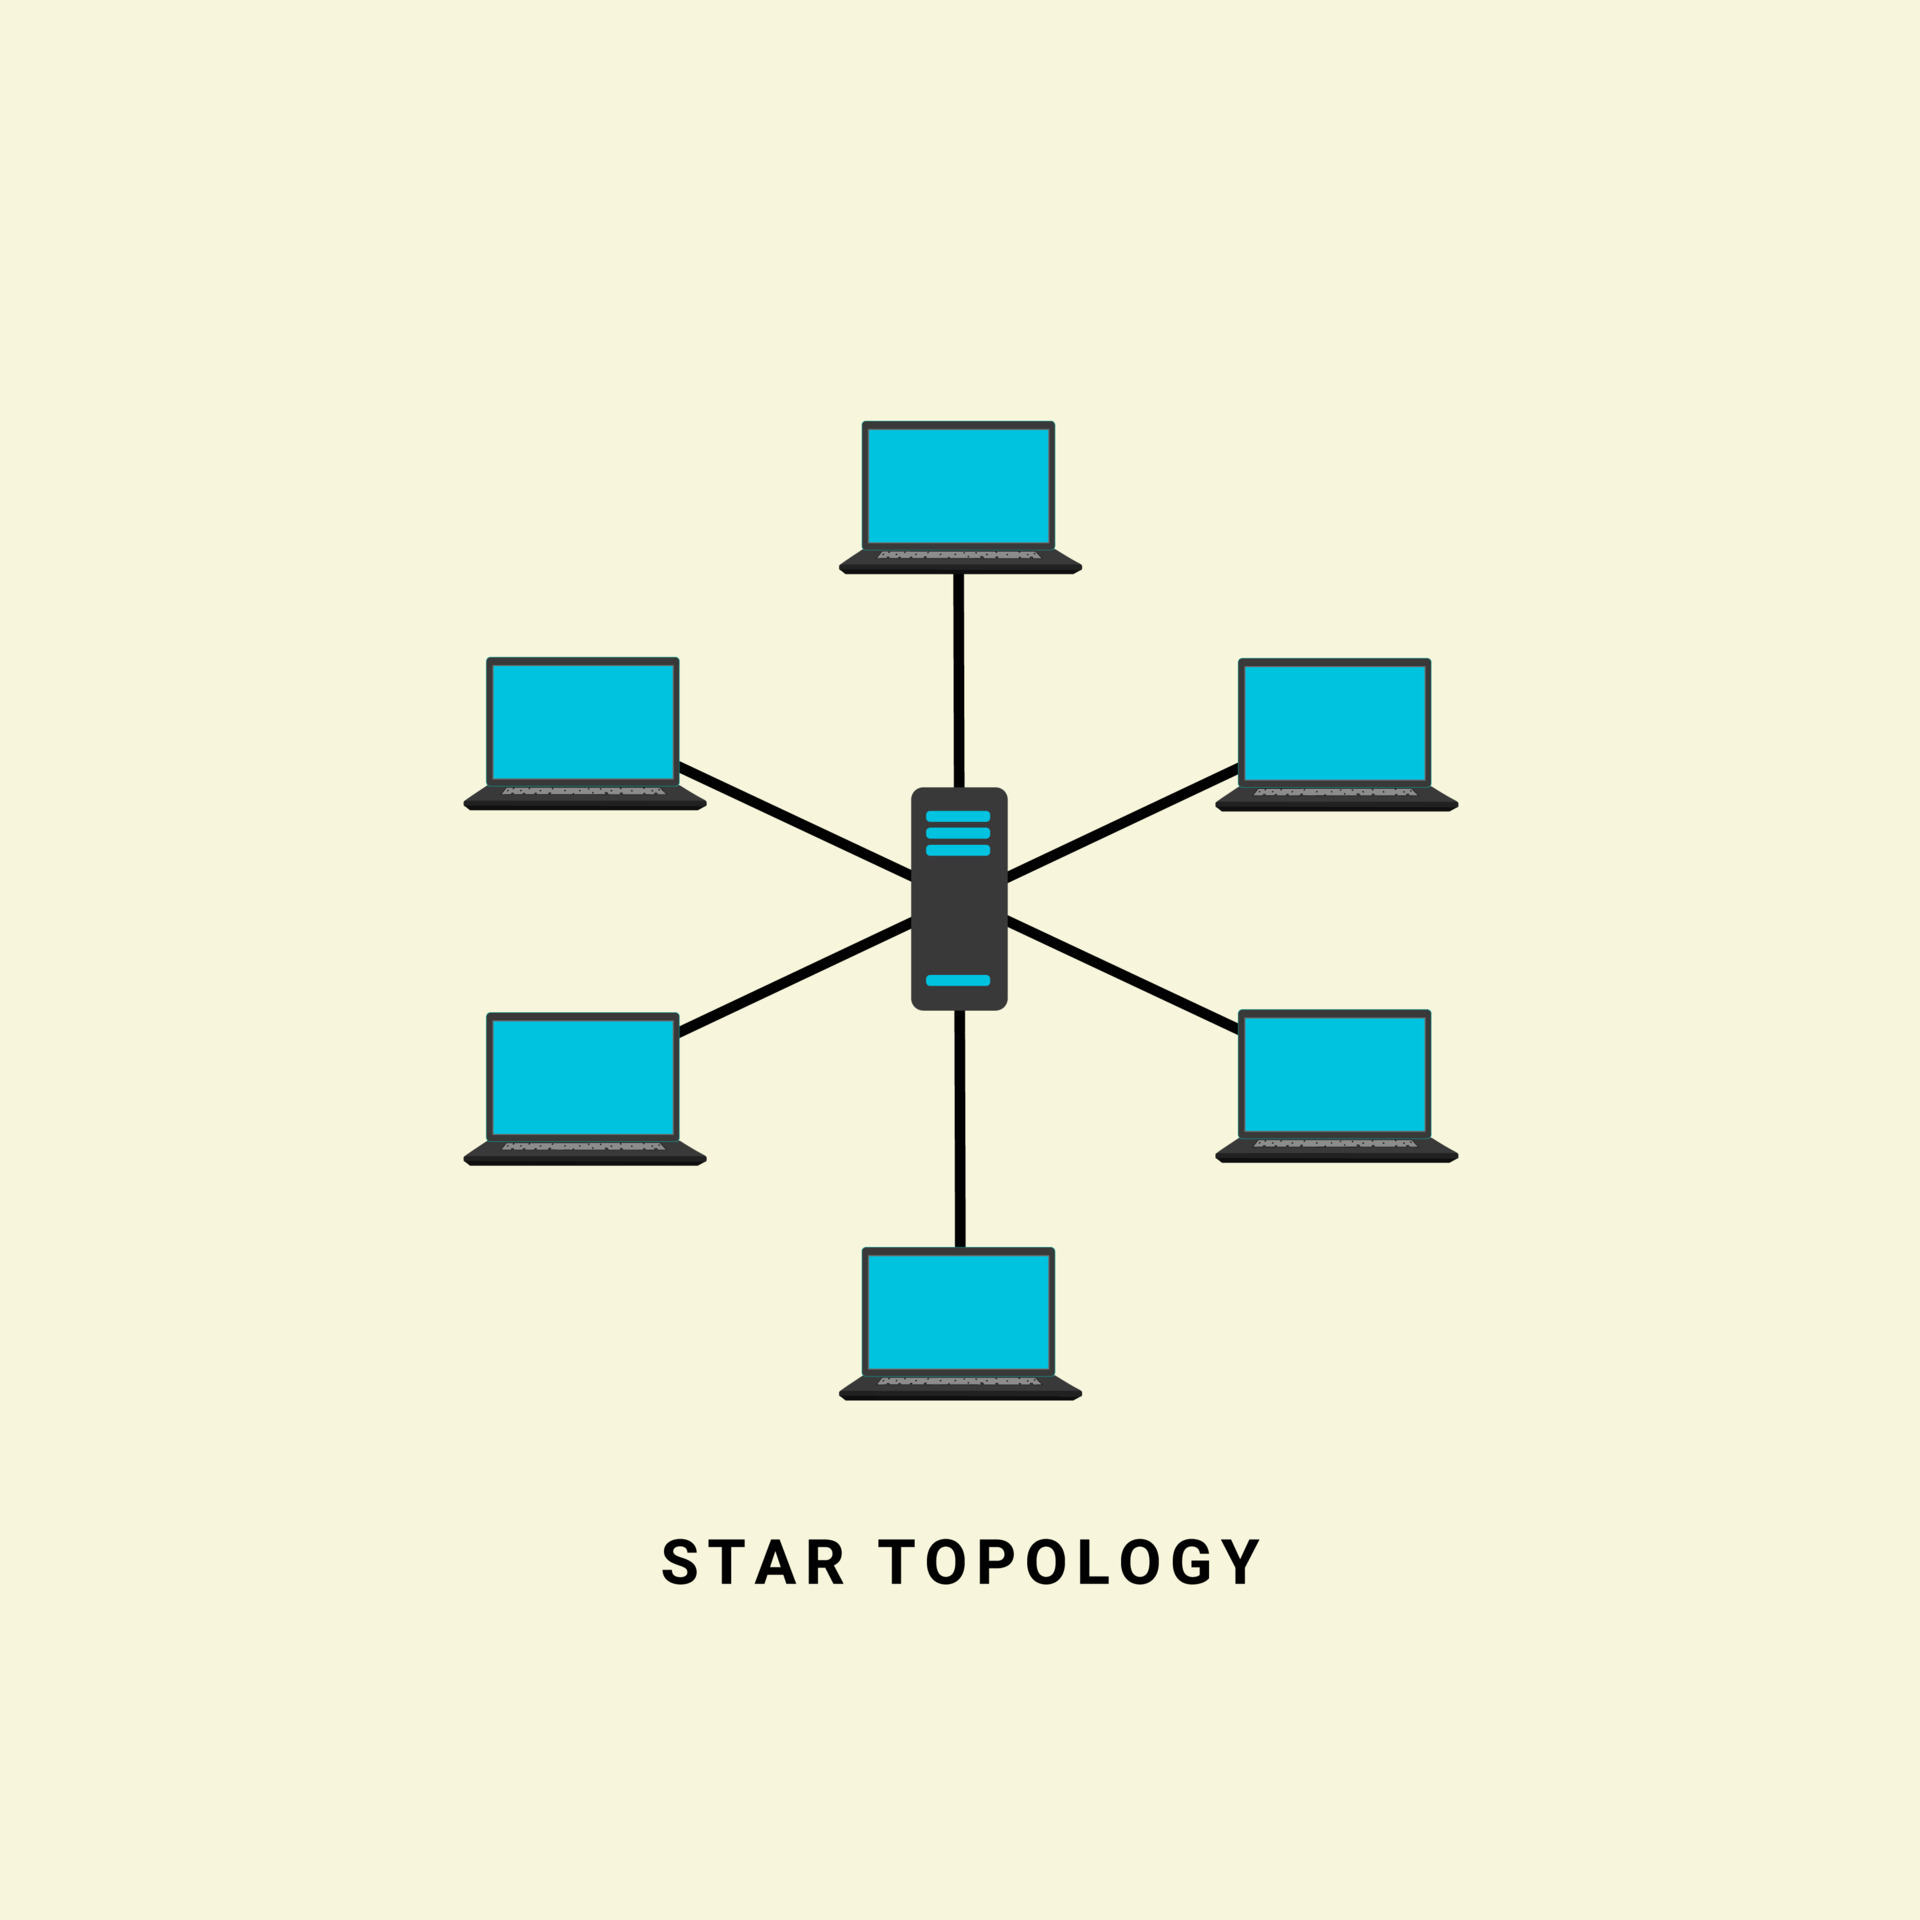 Types of Network Topology: Bus, Ring, Star, Mesh, Tree Diagram